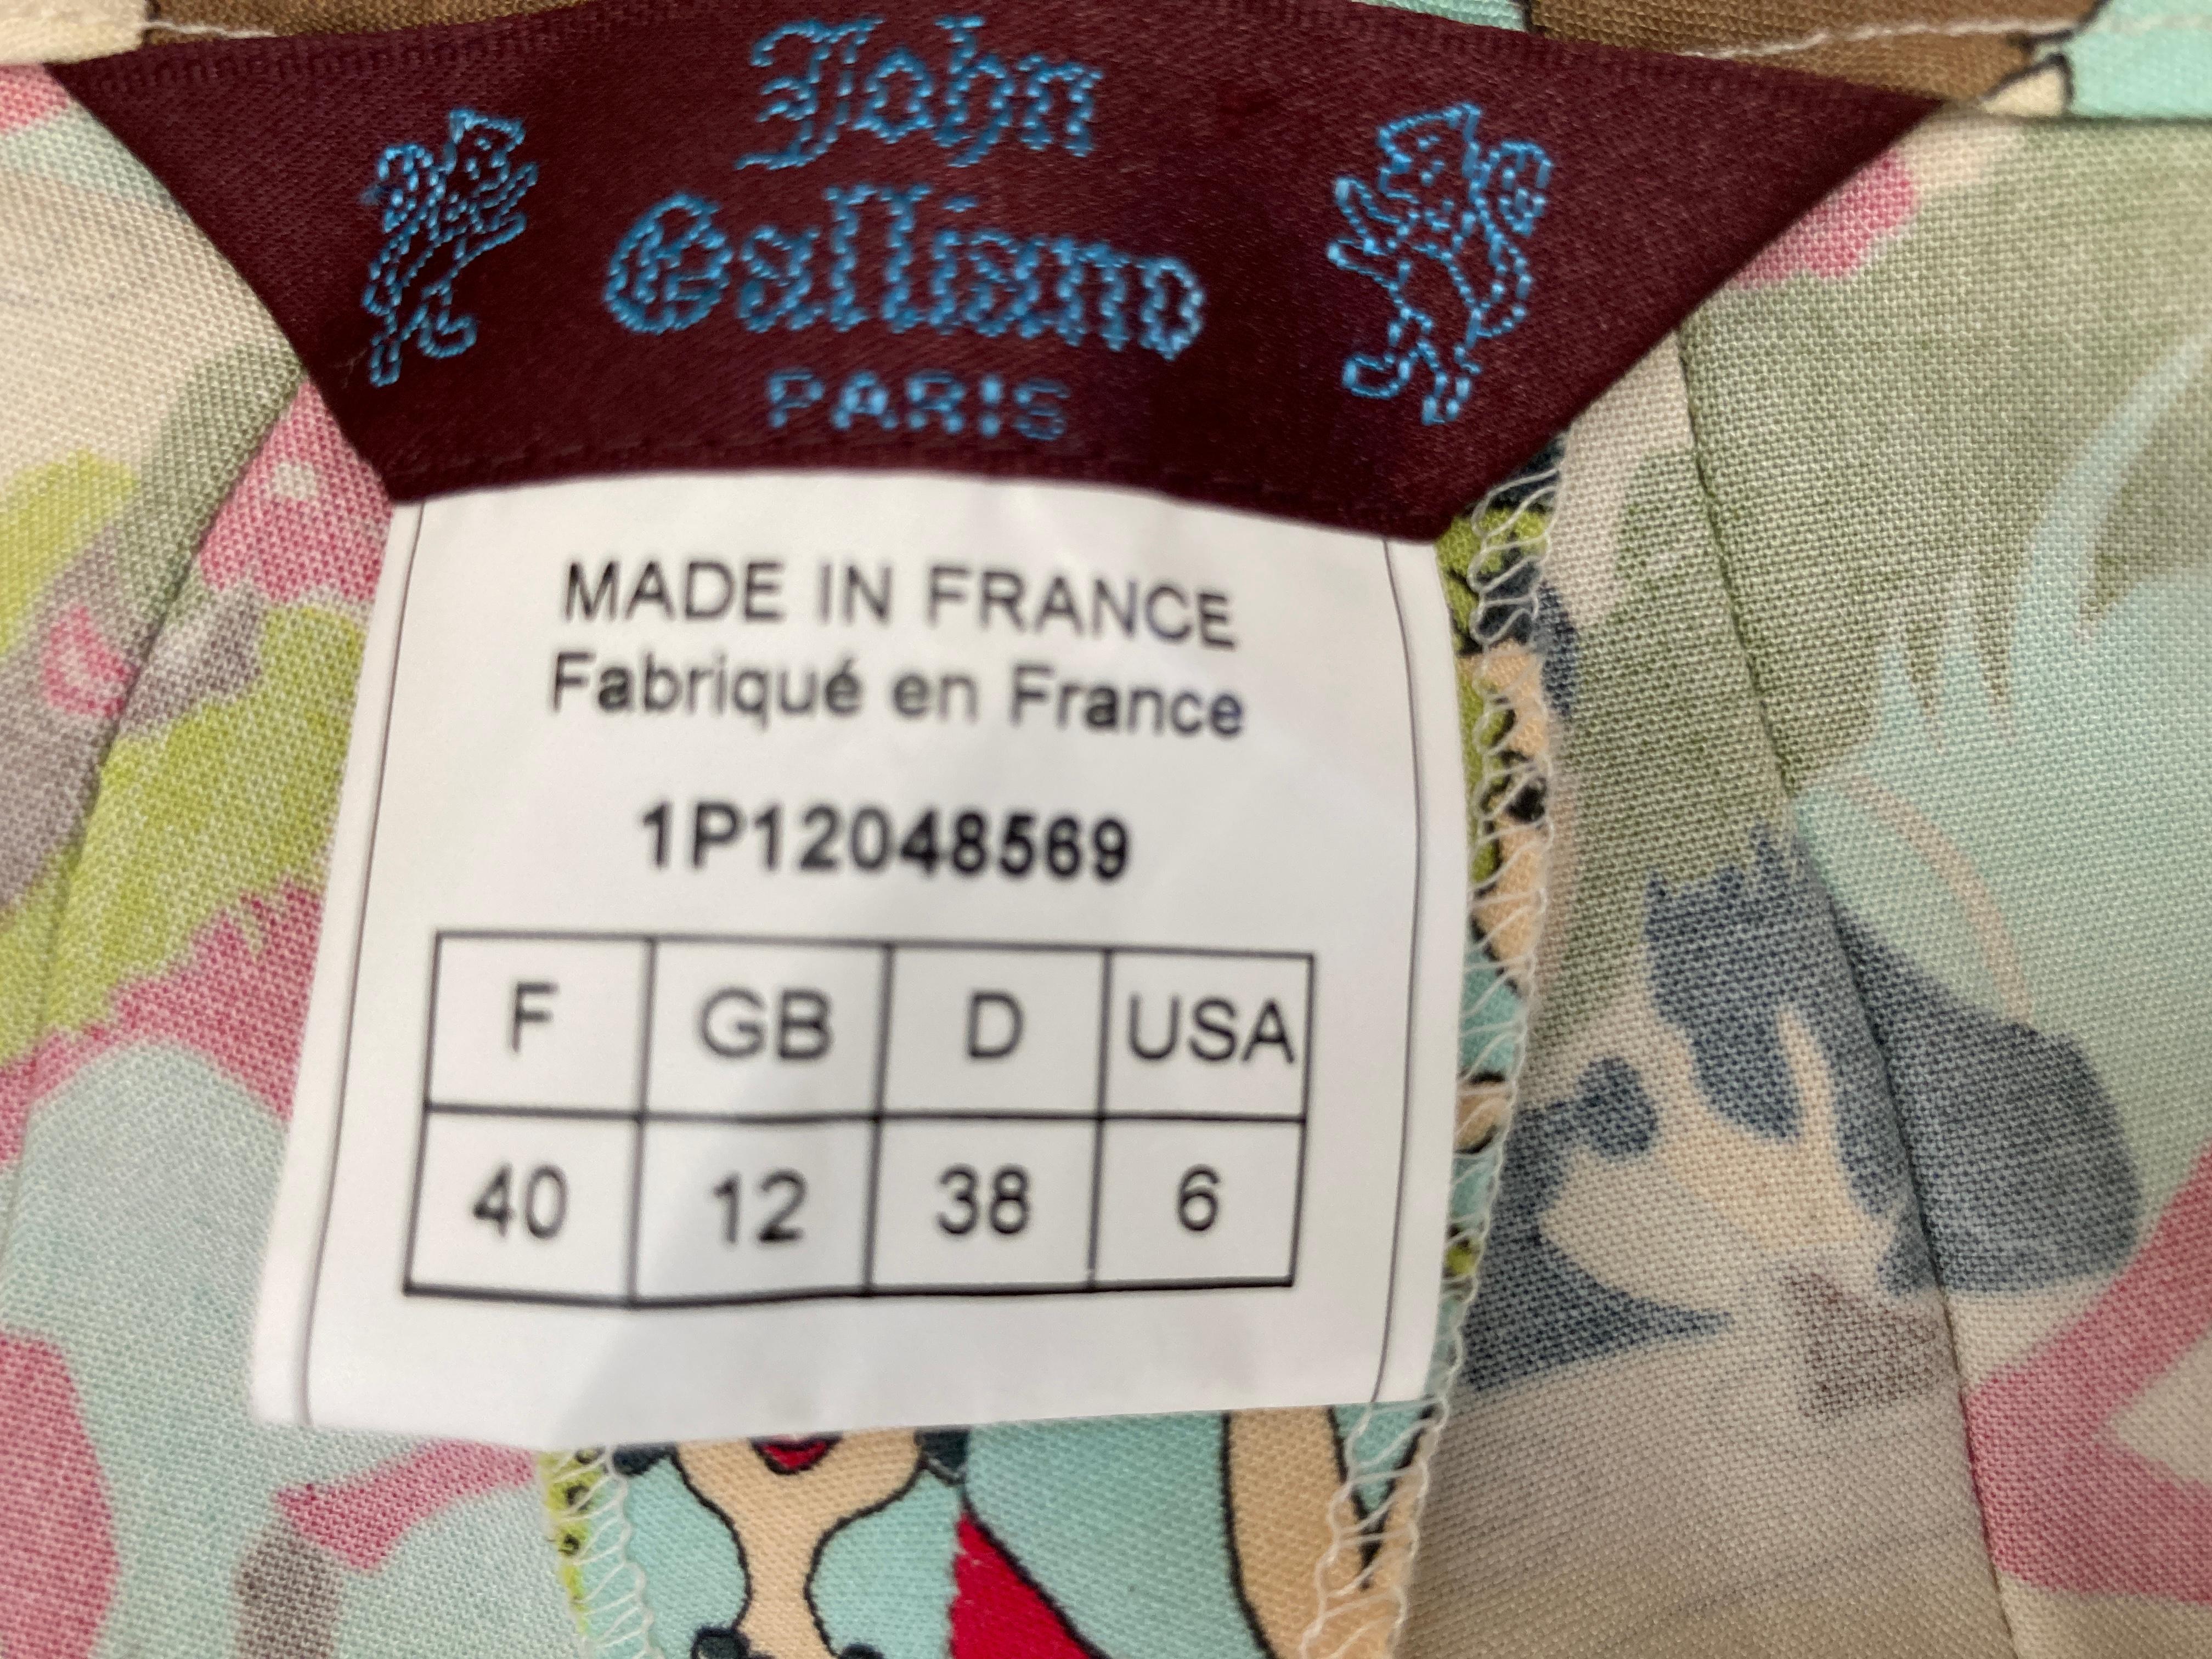 John Galliano Cafe Society Print Vintage Pants, Rare Trousers, 1999's In Excellent Condition For Sale In North Hollywood, CA